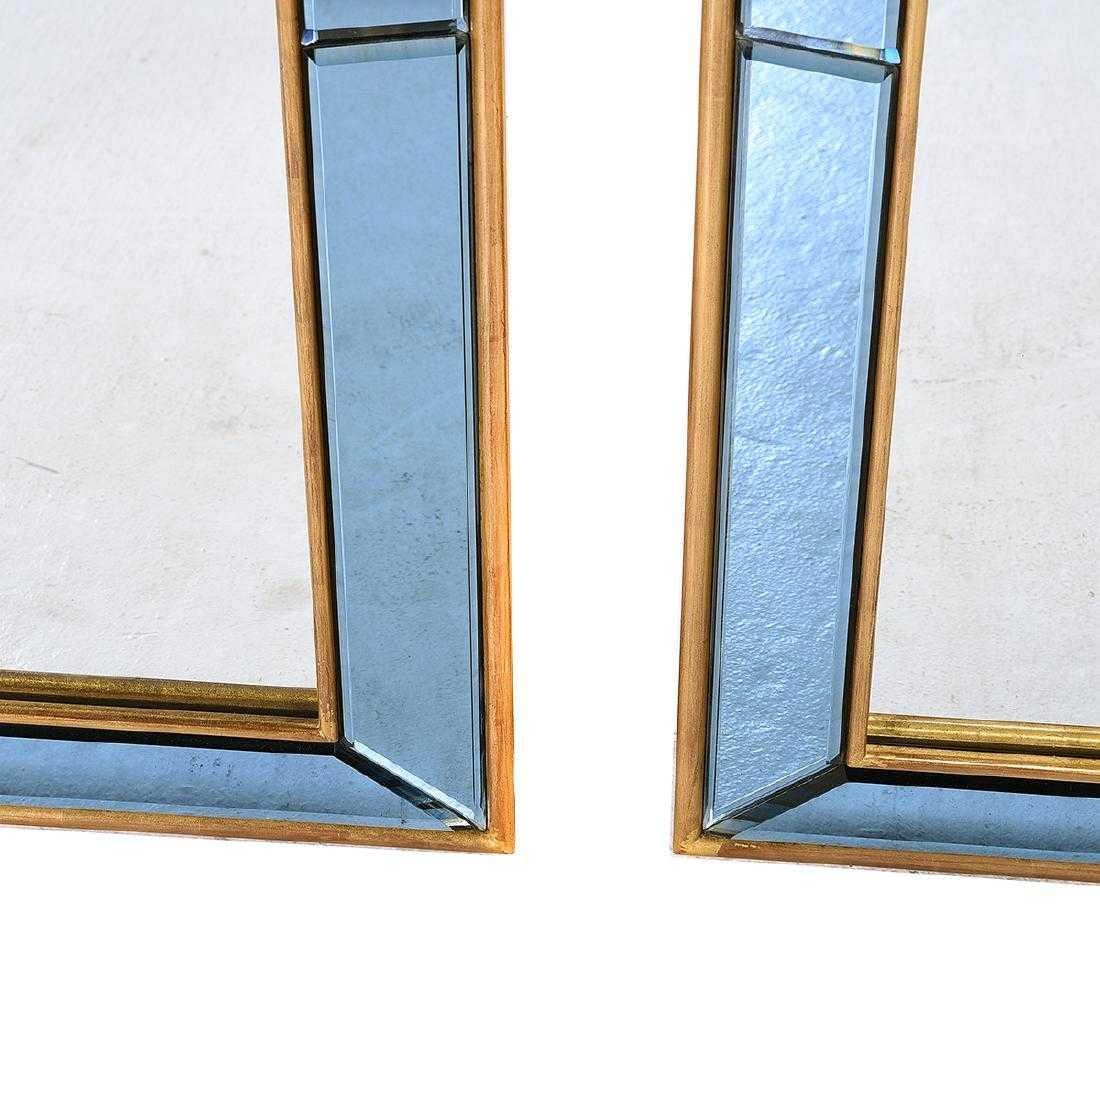 Pair of Neoclassical Styled Mirrors with Beveled Blue Mirror Surround Panes 5